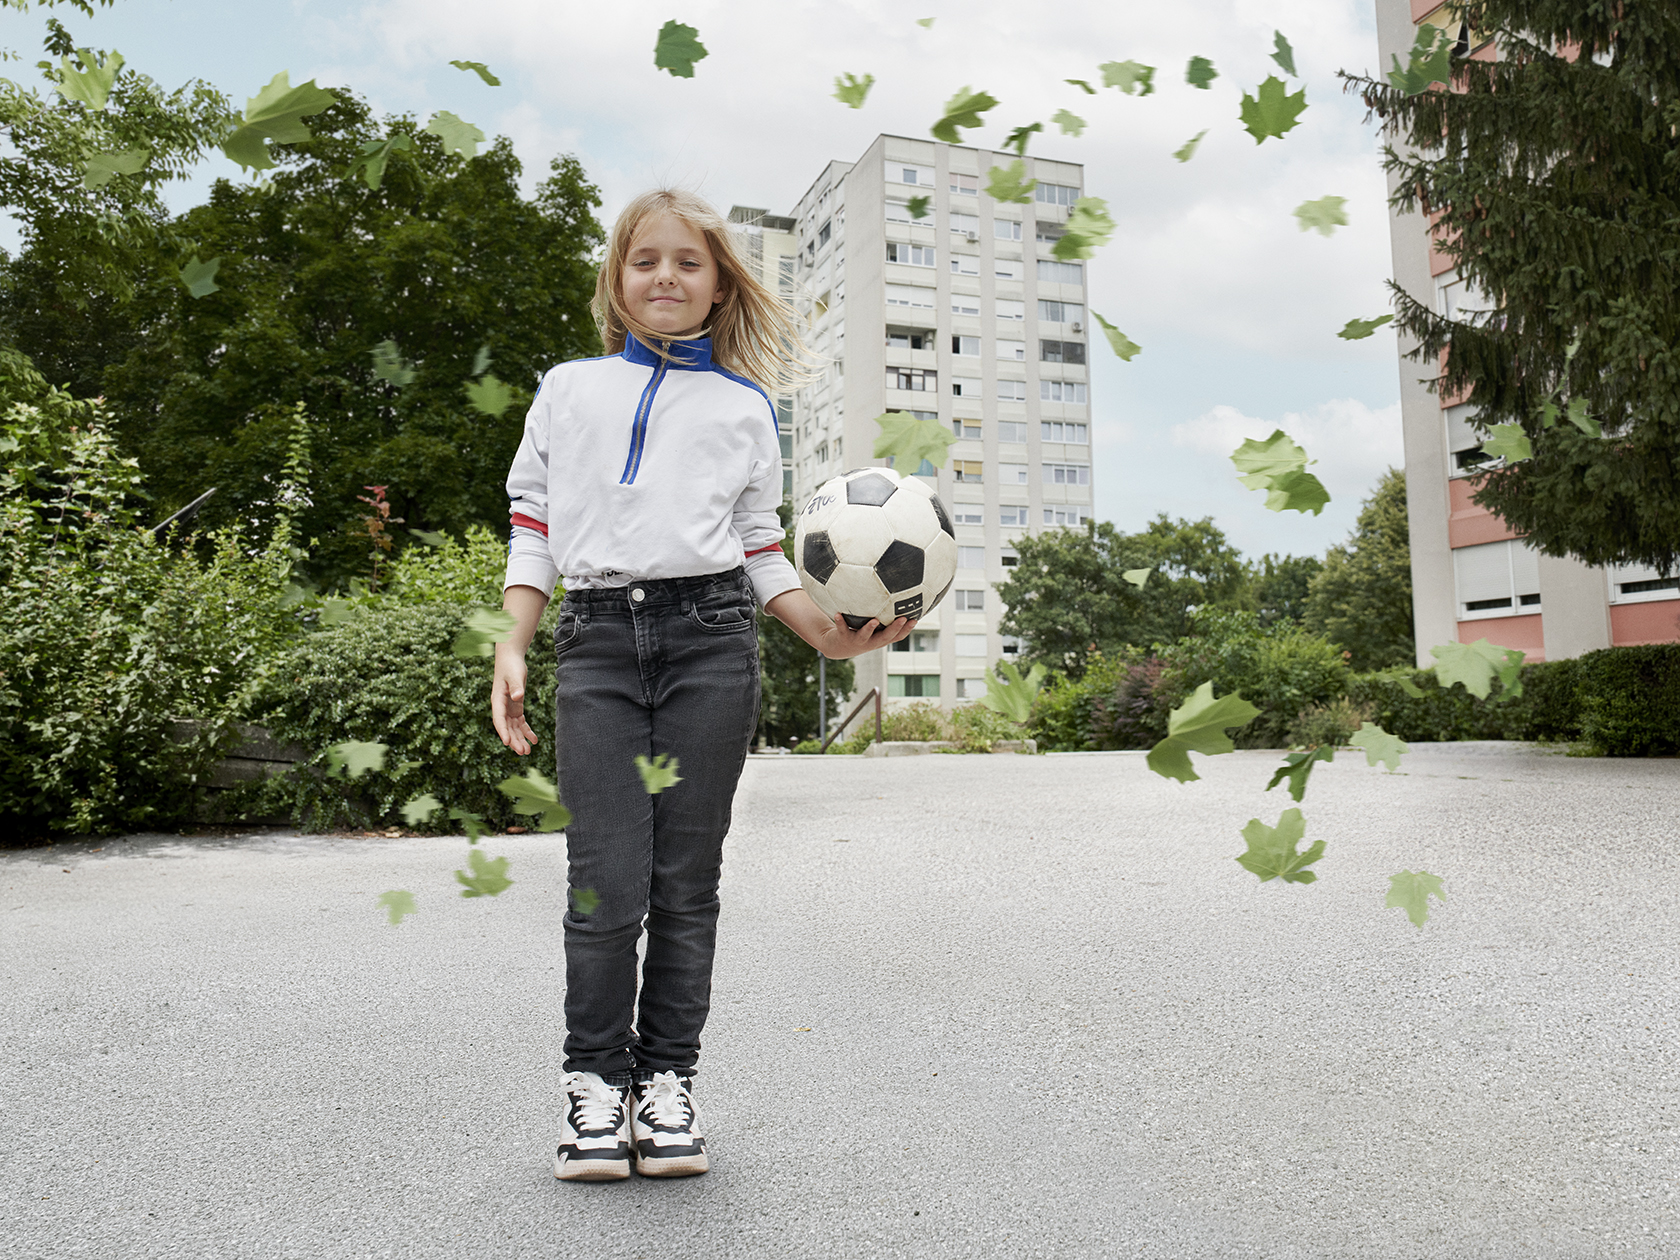 A girl with a football in her hand